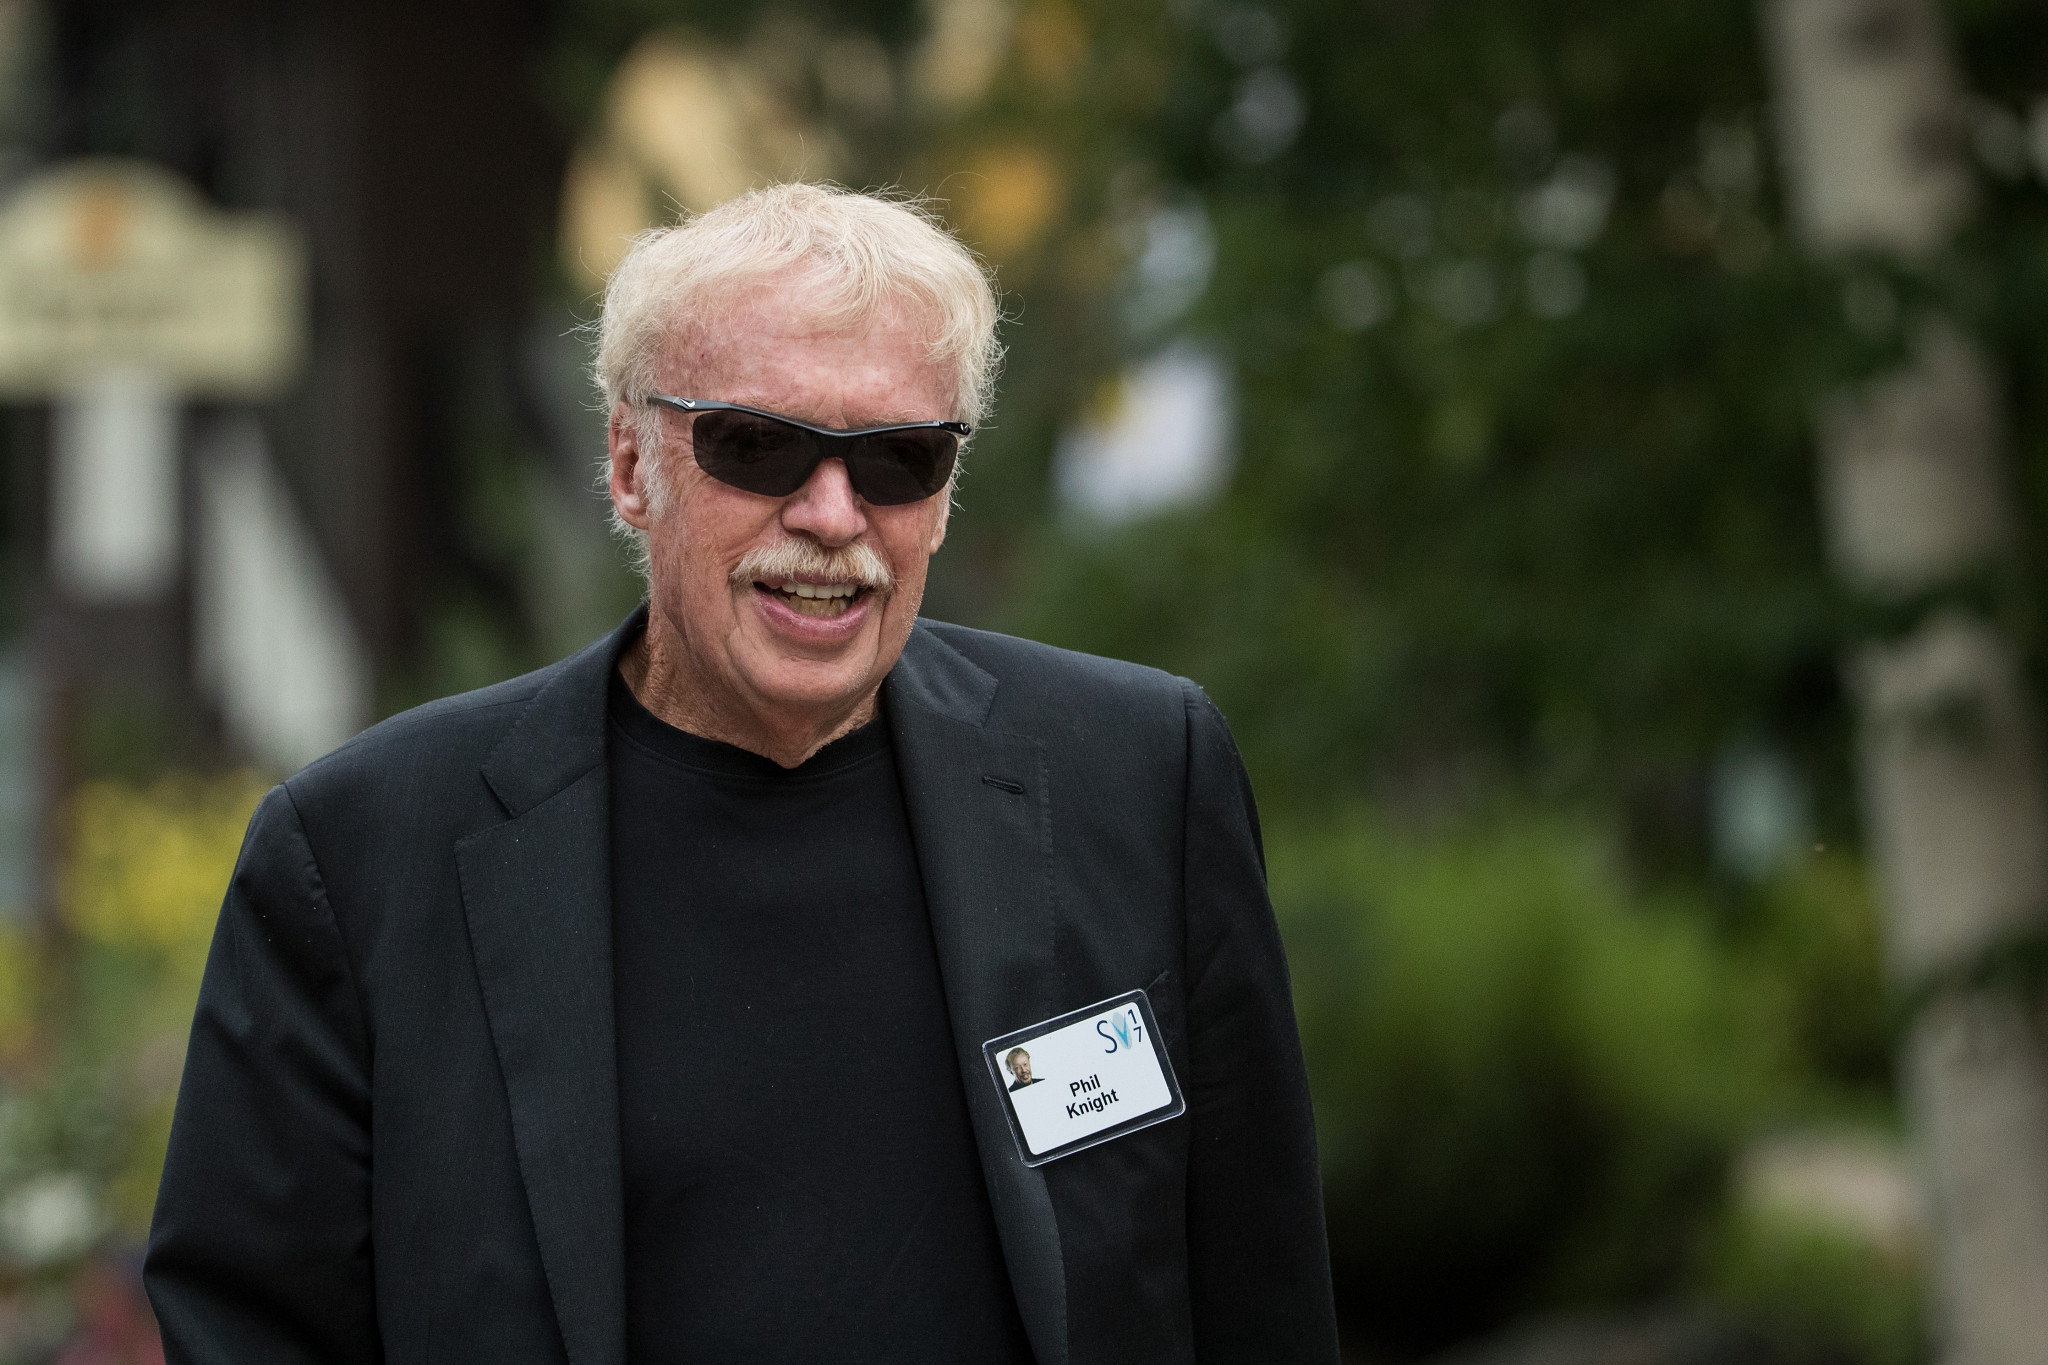 Phil Knight has received an honorary doctorate from the University of Oregon ©Getty Images